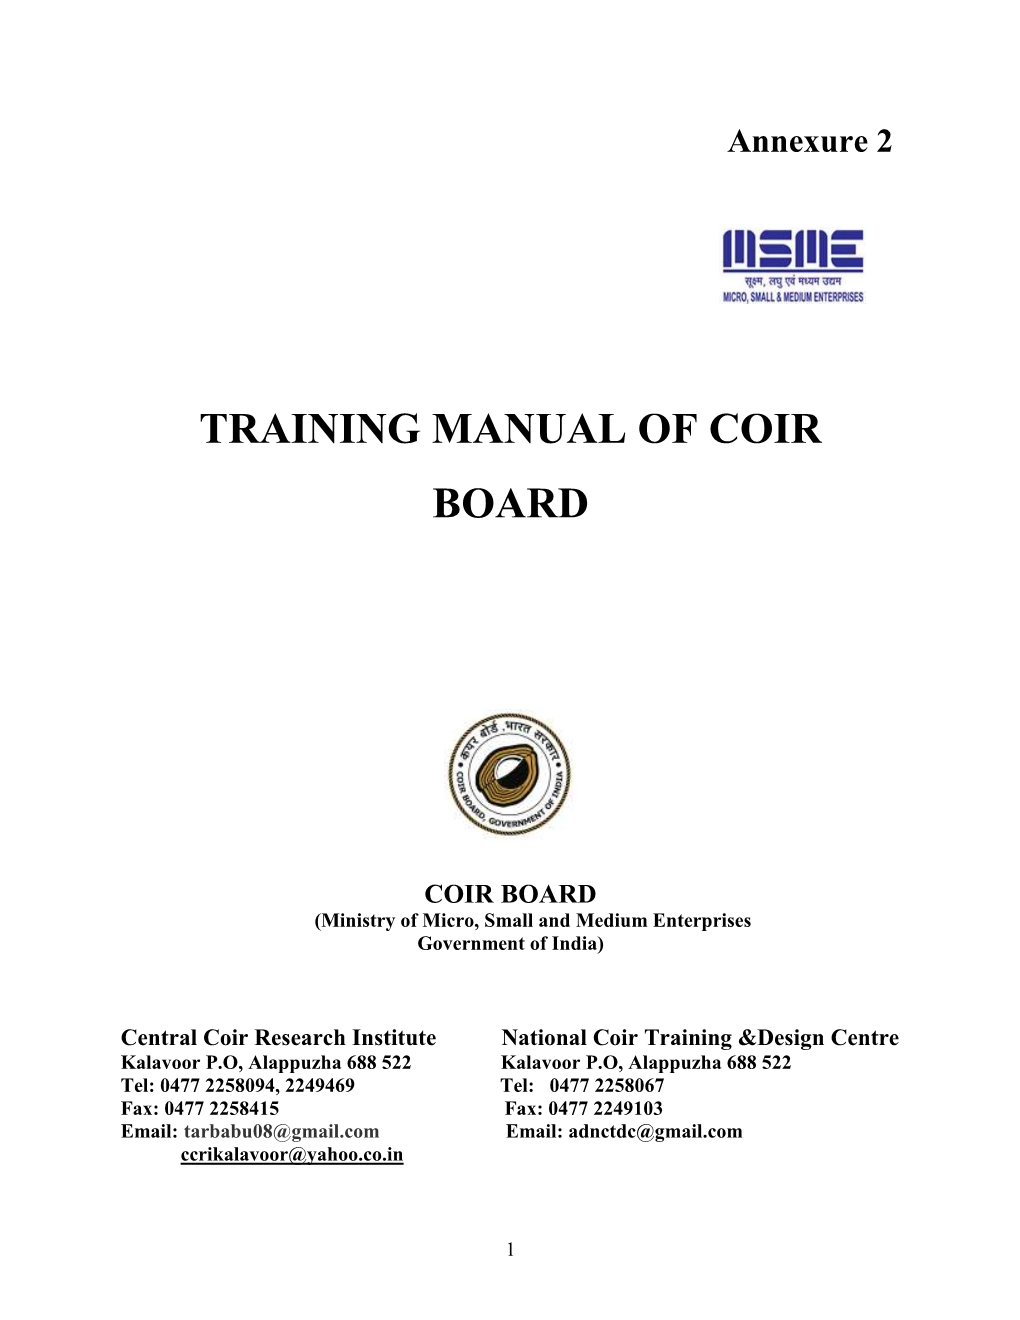 3.Annexure 2 Training Manual of Coir Board